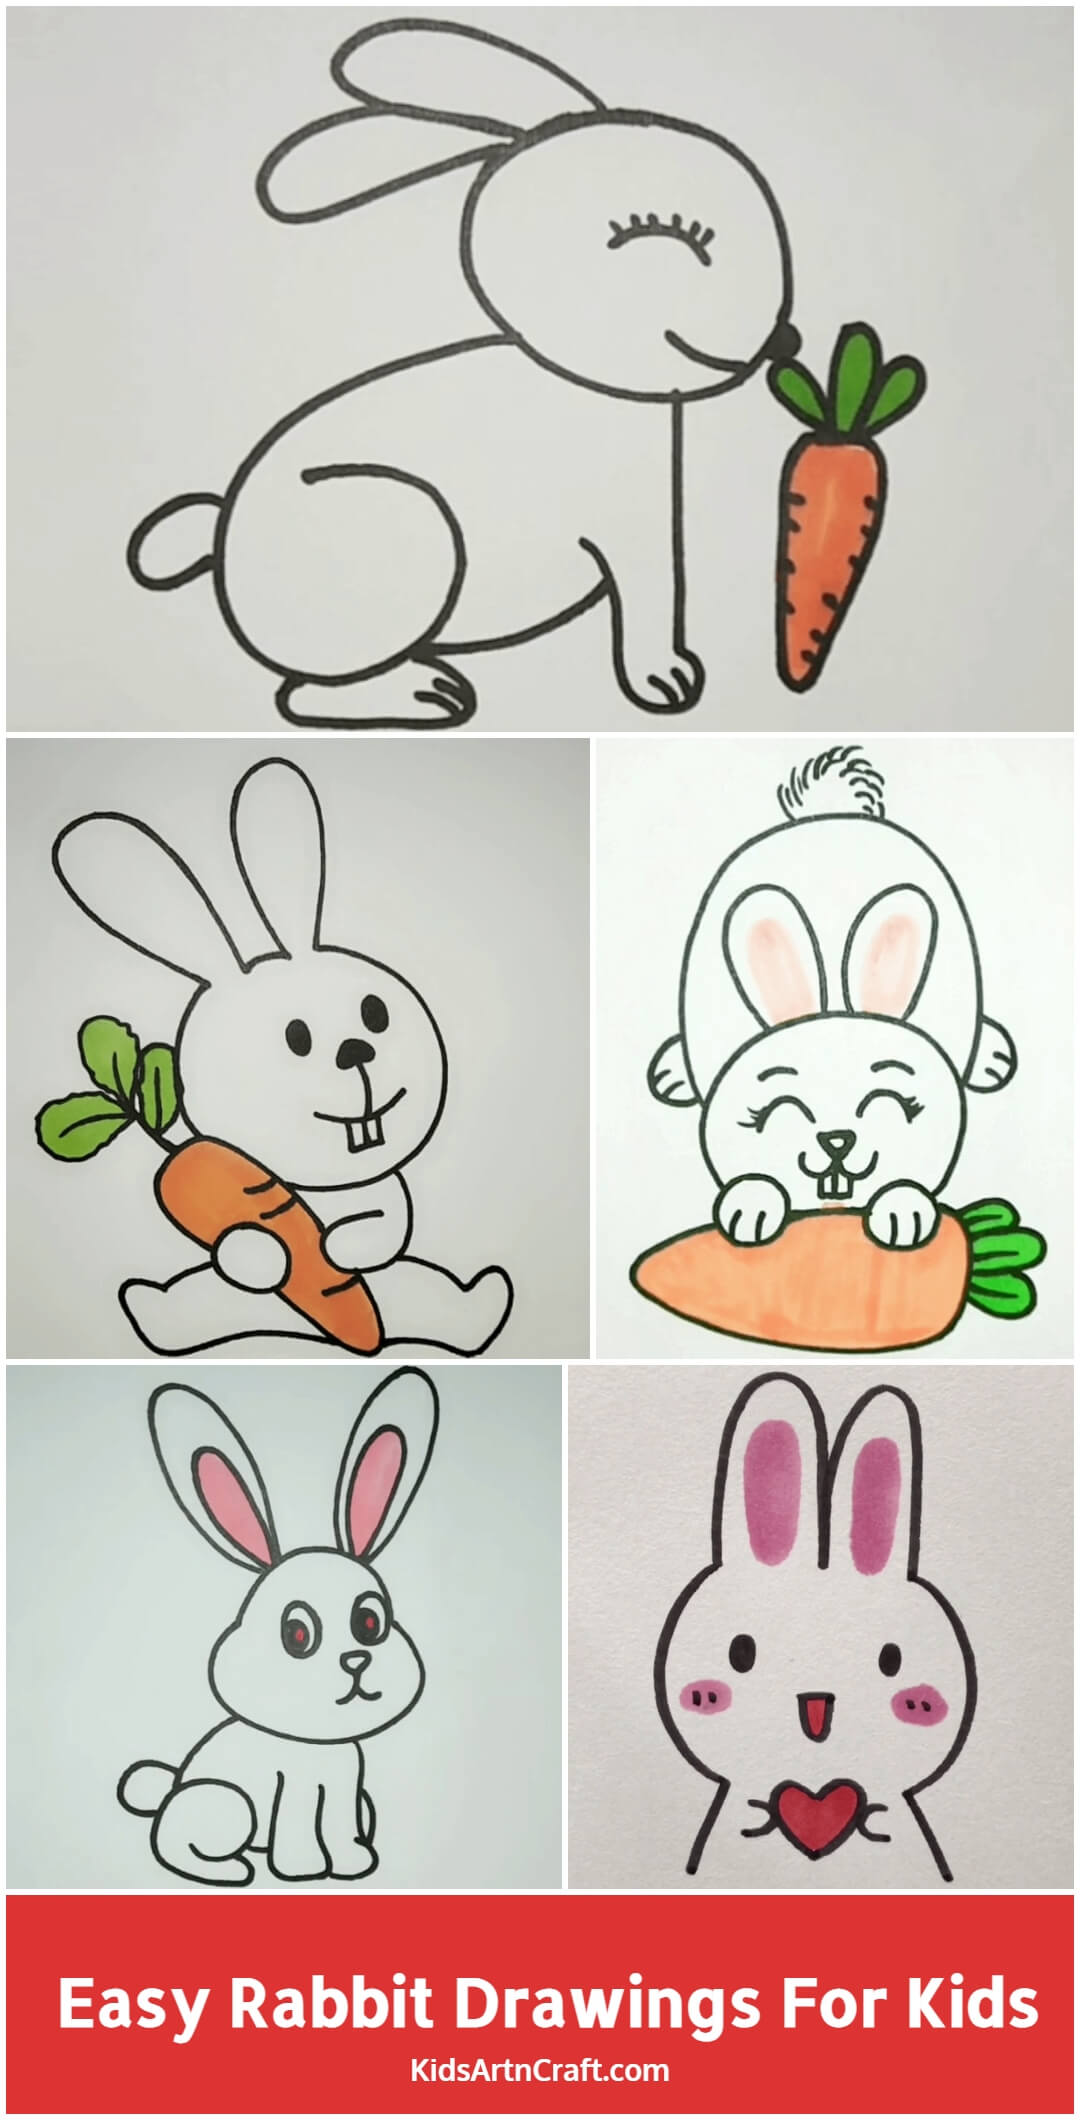 how to draw rabbit drawing from 22 number easy step by step@DrawingTalent -  YouTube